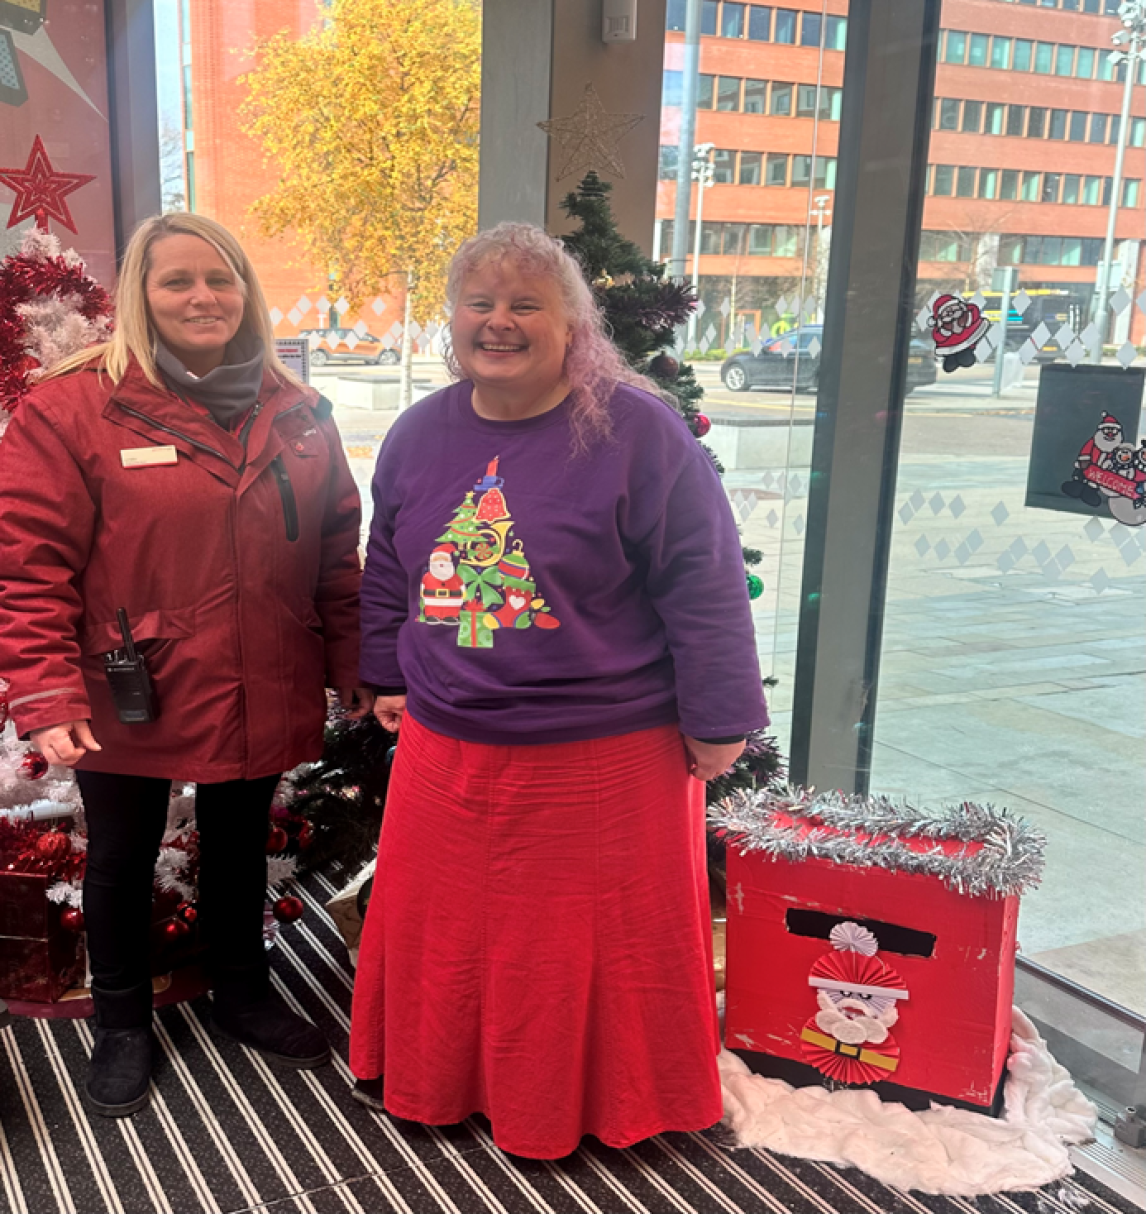 Greater Anglia's Lynda Mason and Denise Vincent, who helped organise the donations